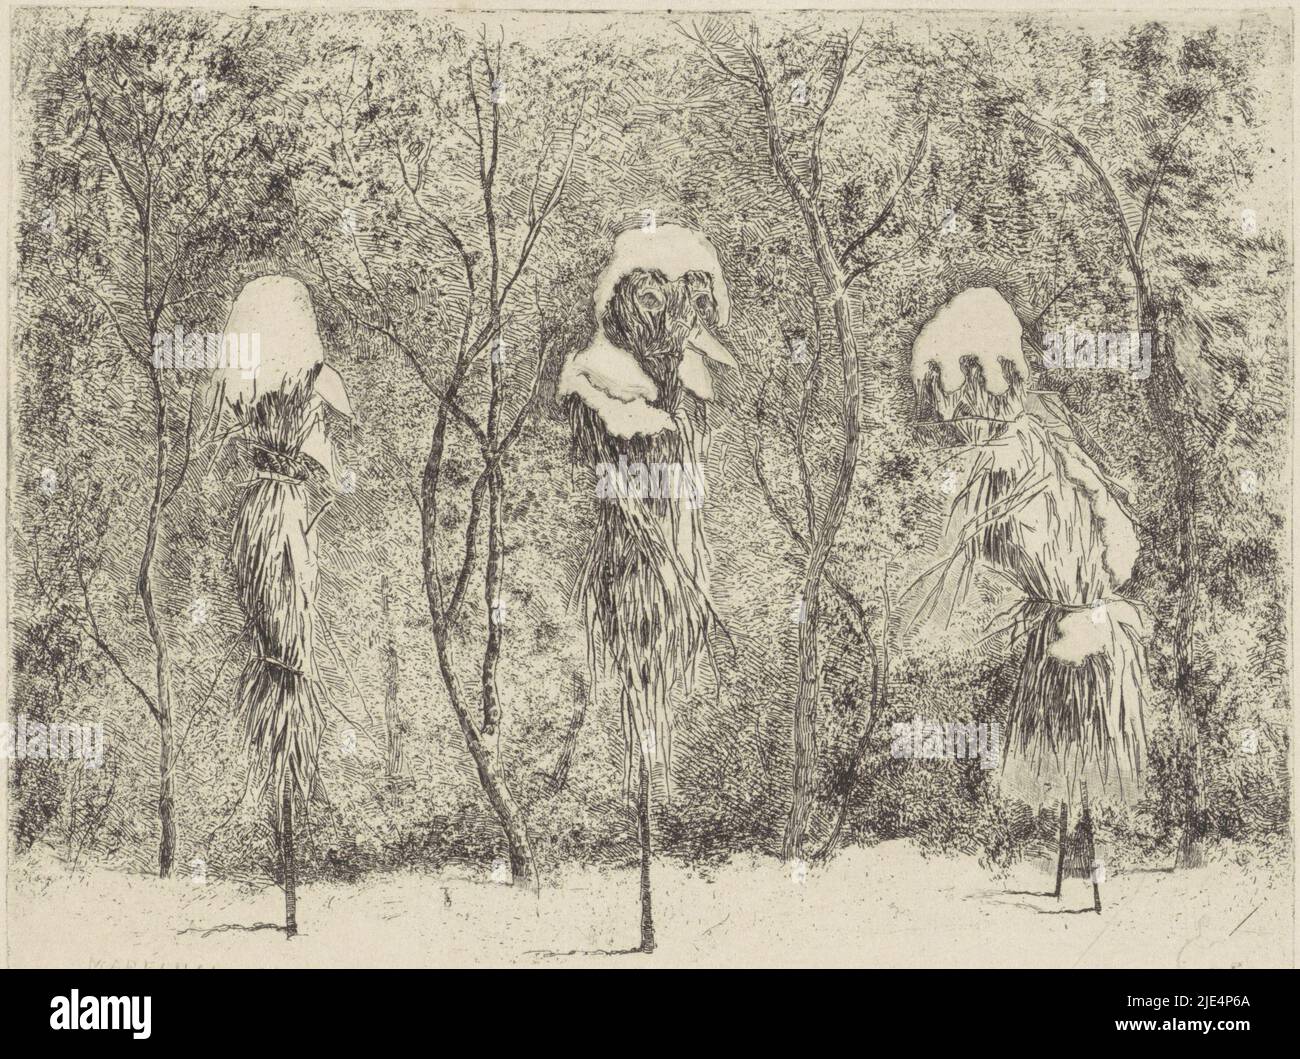 Three against the frost with straw packed stem roses, covered with snow. The captions identify the rose bushes with figures from the Franco-German war: François Certain Canrobert and Mathilde Bonaparte, Fantasy composition relating to the Franco-German war Mes rosiers and hiver., print maker: Louis Charles Hora Siccama, (mentioned on object), 1876, paper, etching, drypoint, h 147 mm × w 180 mm Stock Photo